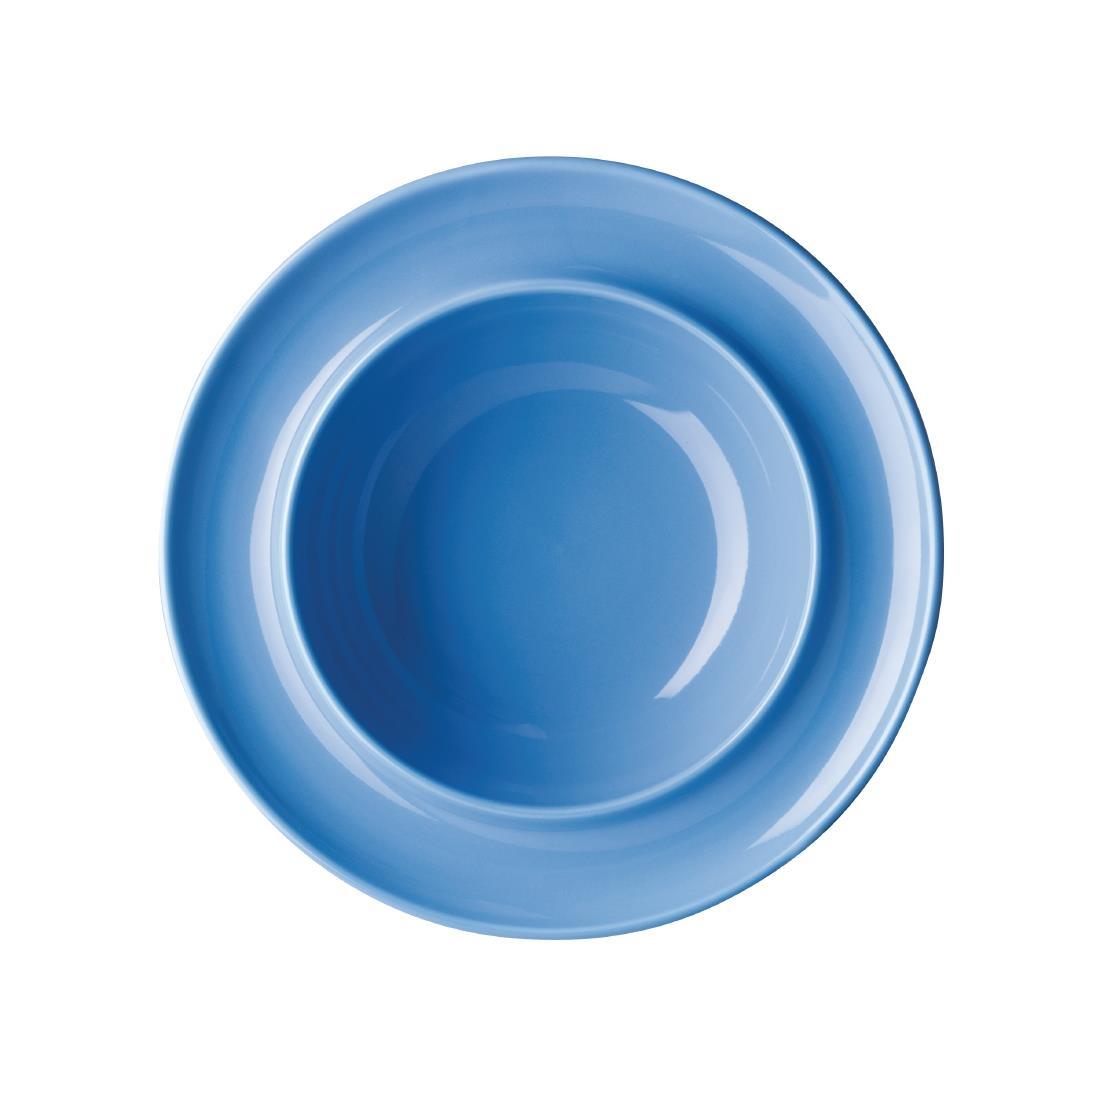 Olympia Heritage Raised Rim Bowl Blue 205mm (Pack of 4) - DW142  - 1